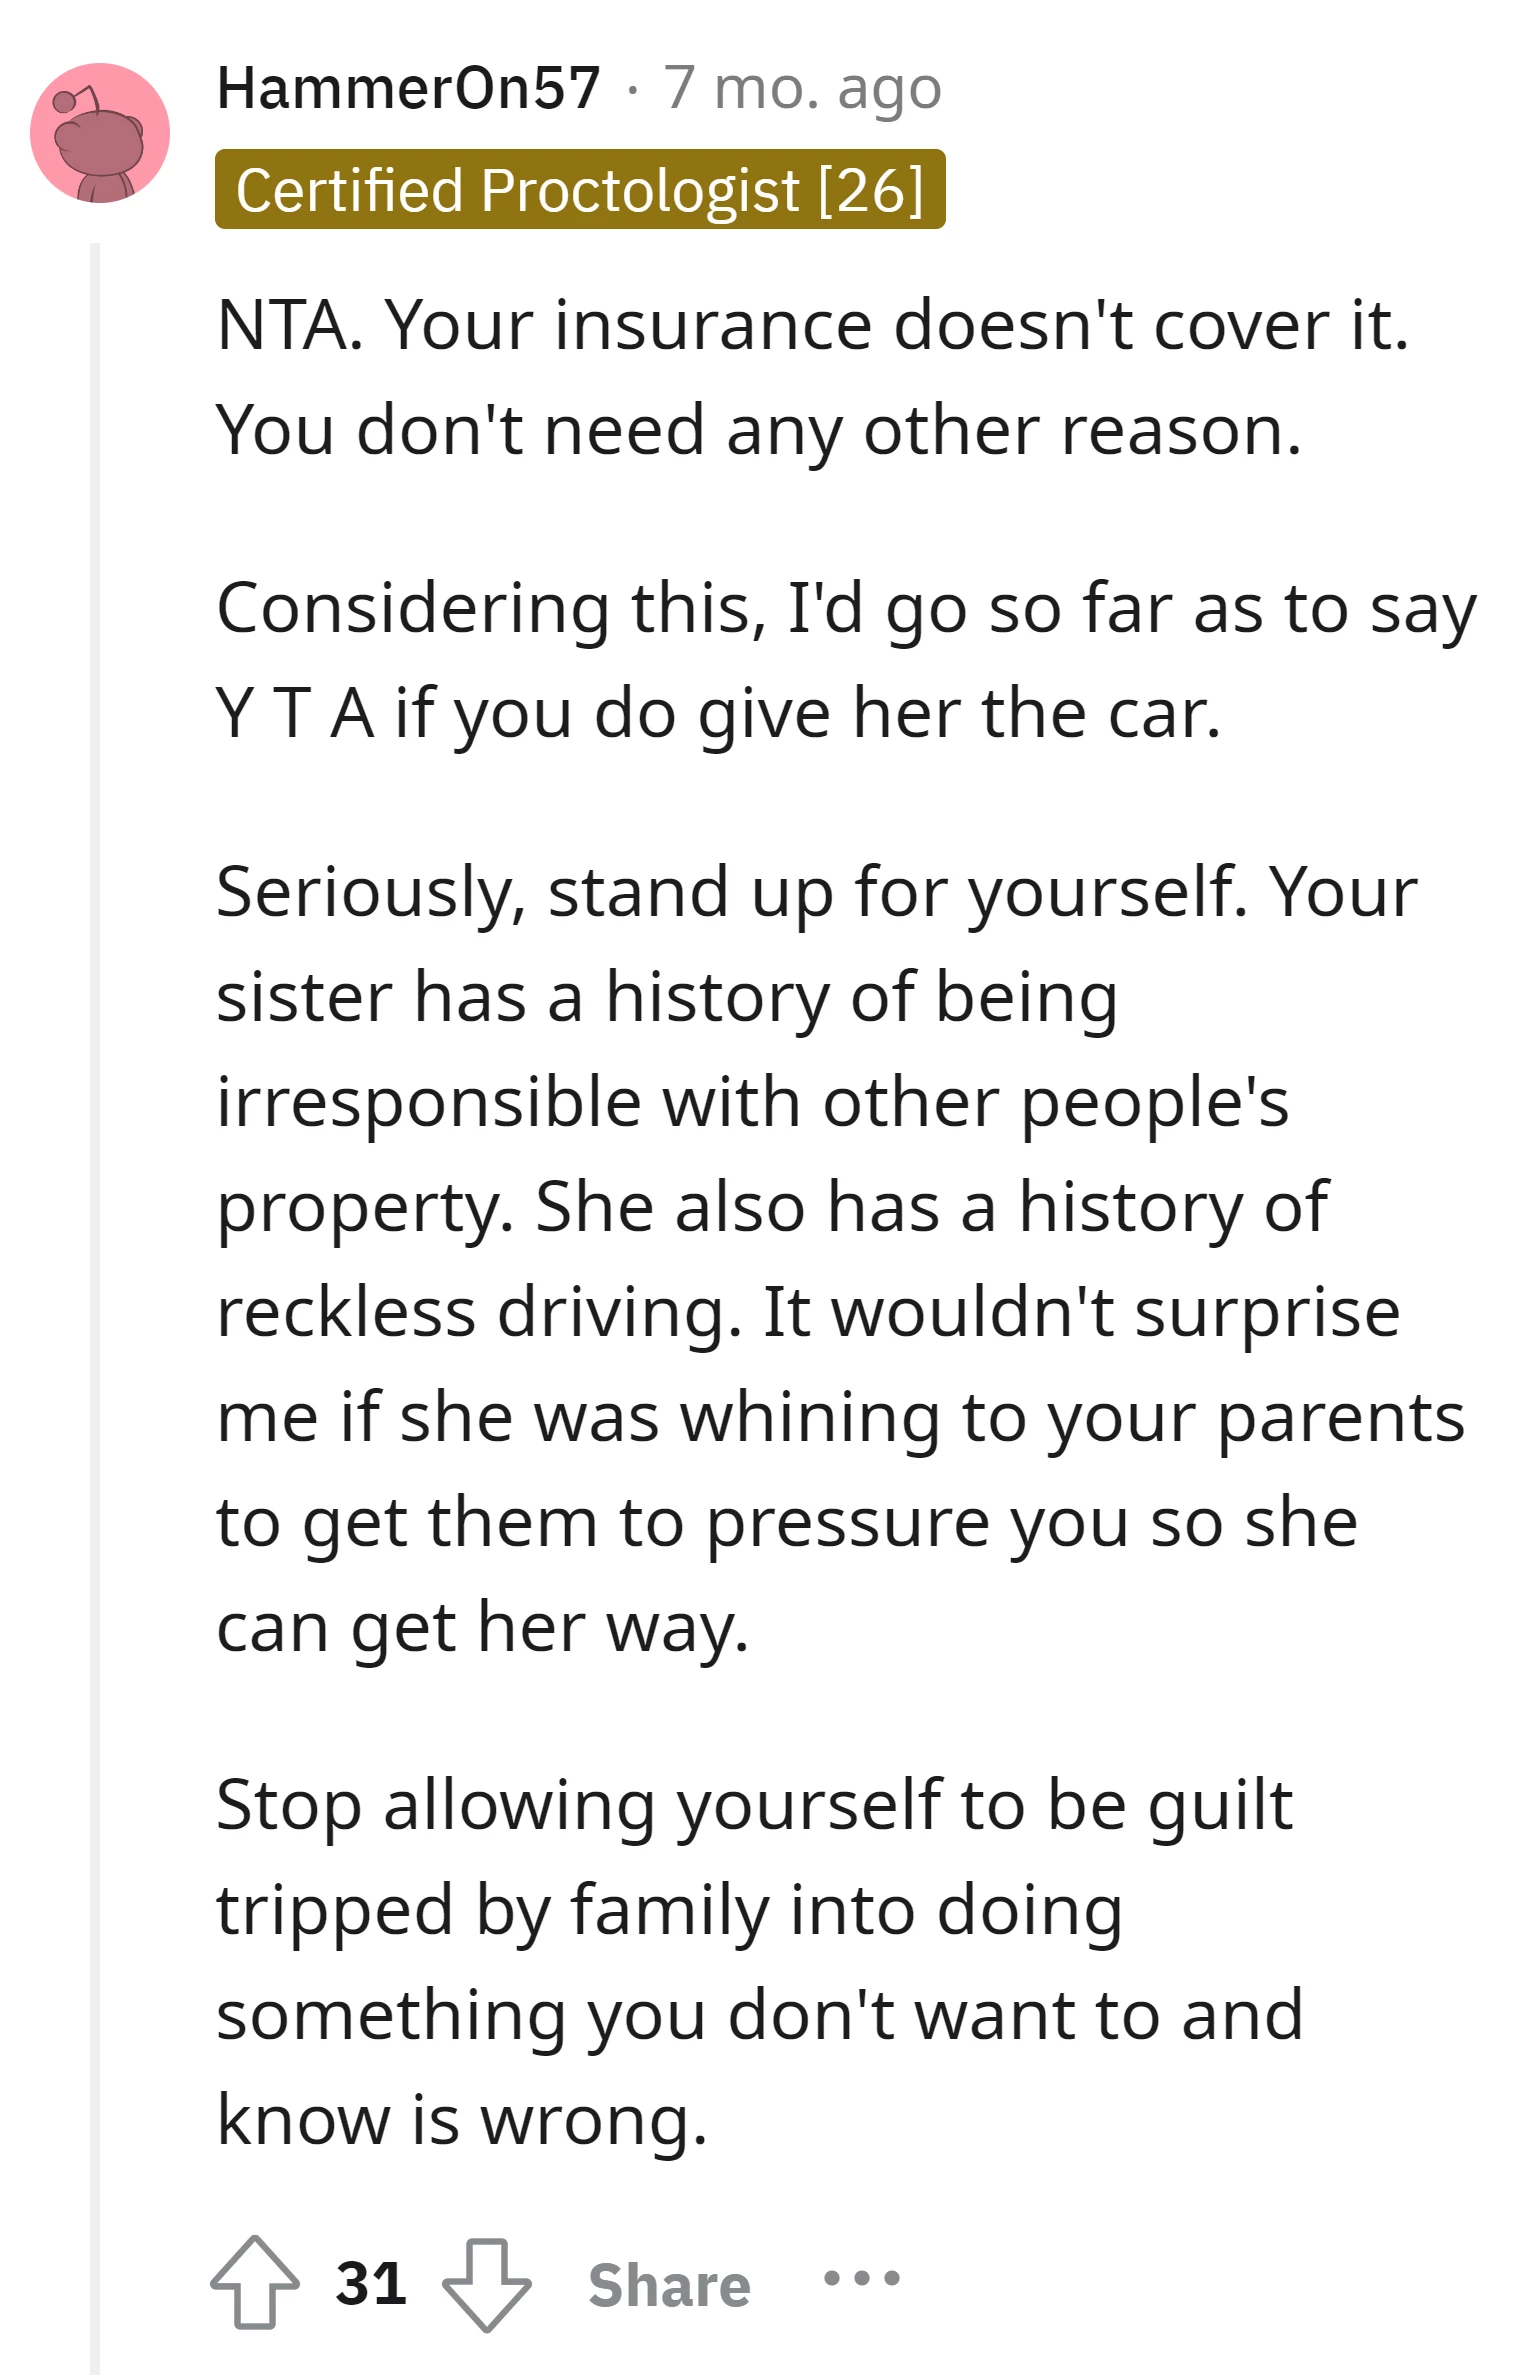 The OP should stand up for herself against family pressure